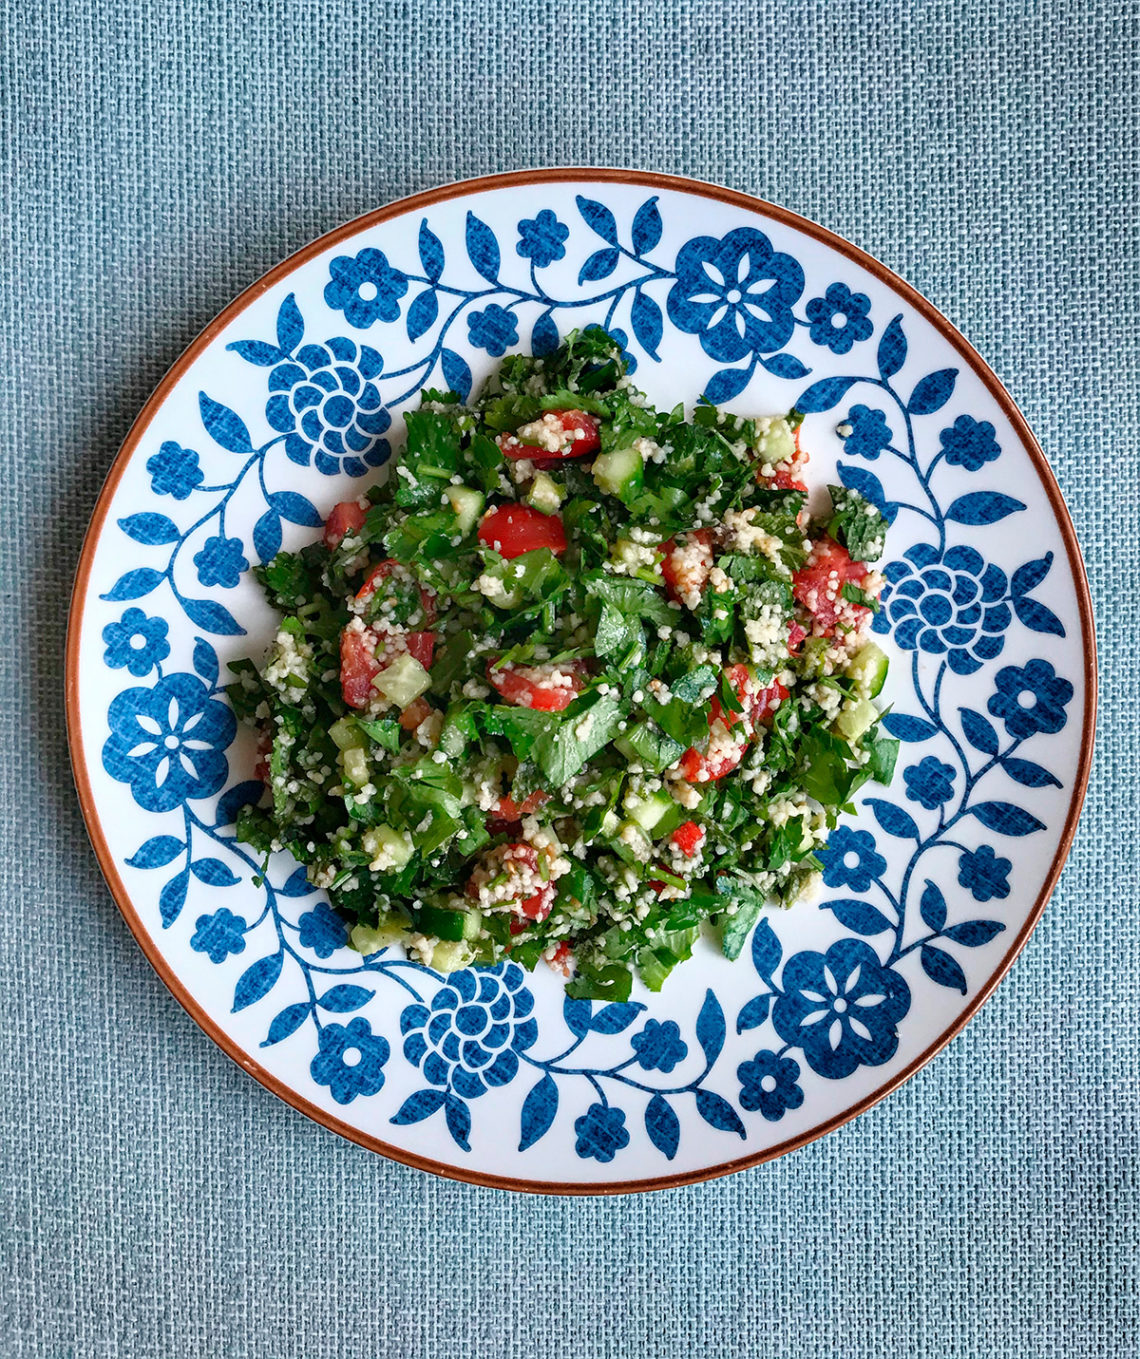 Moroccan tabbouleh by Andrei Velichko. Cooking tips from famous chefs.